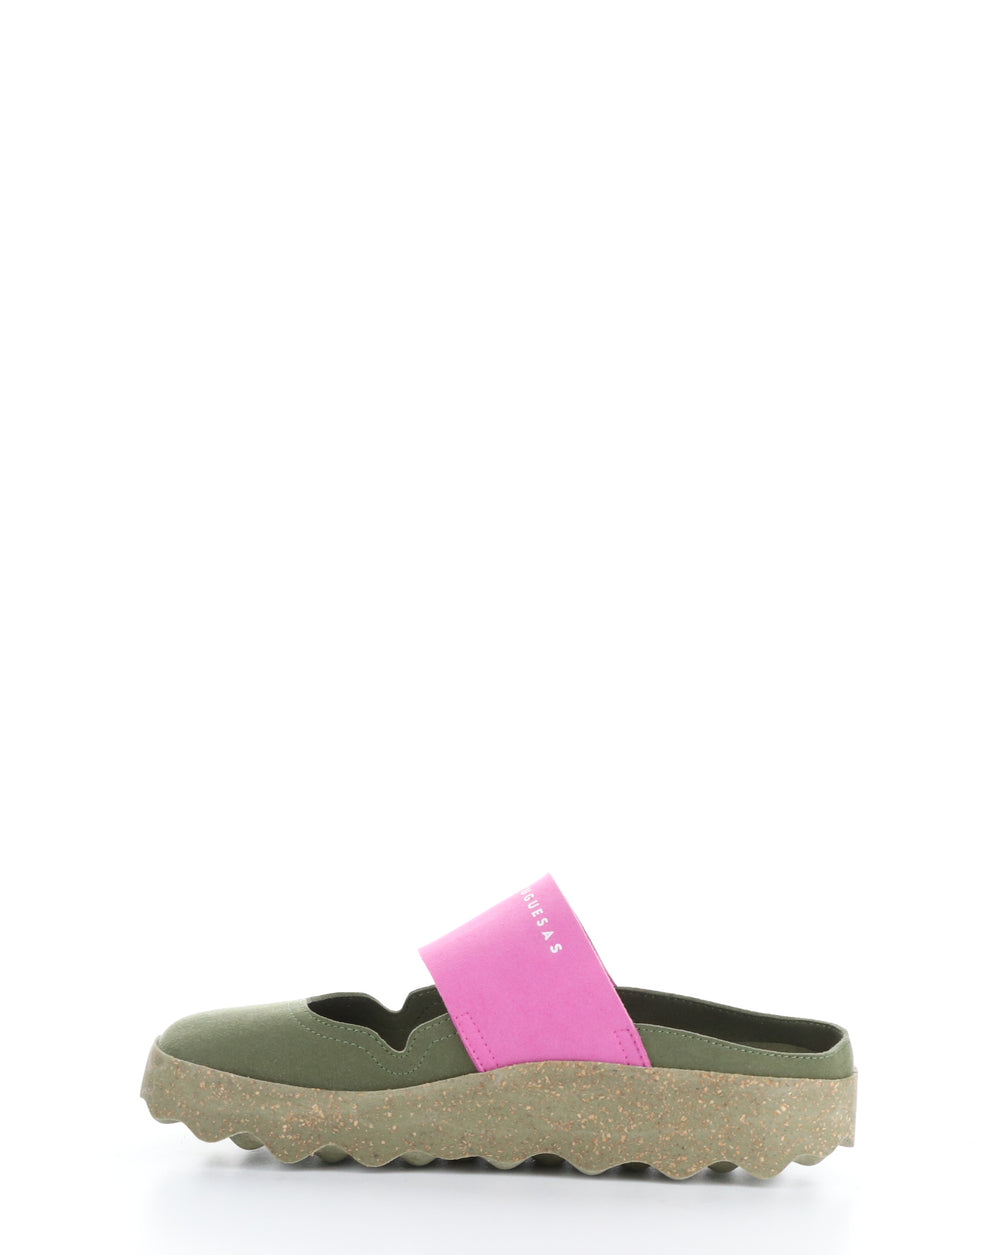 CANA176ASP 001 MILITARY GREEN Slip-on Shoes